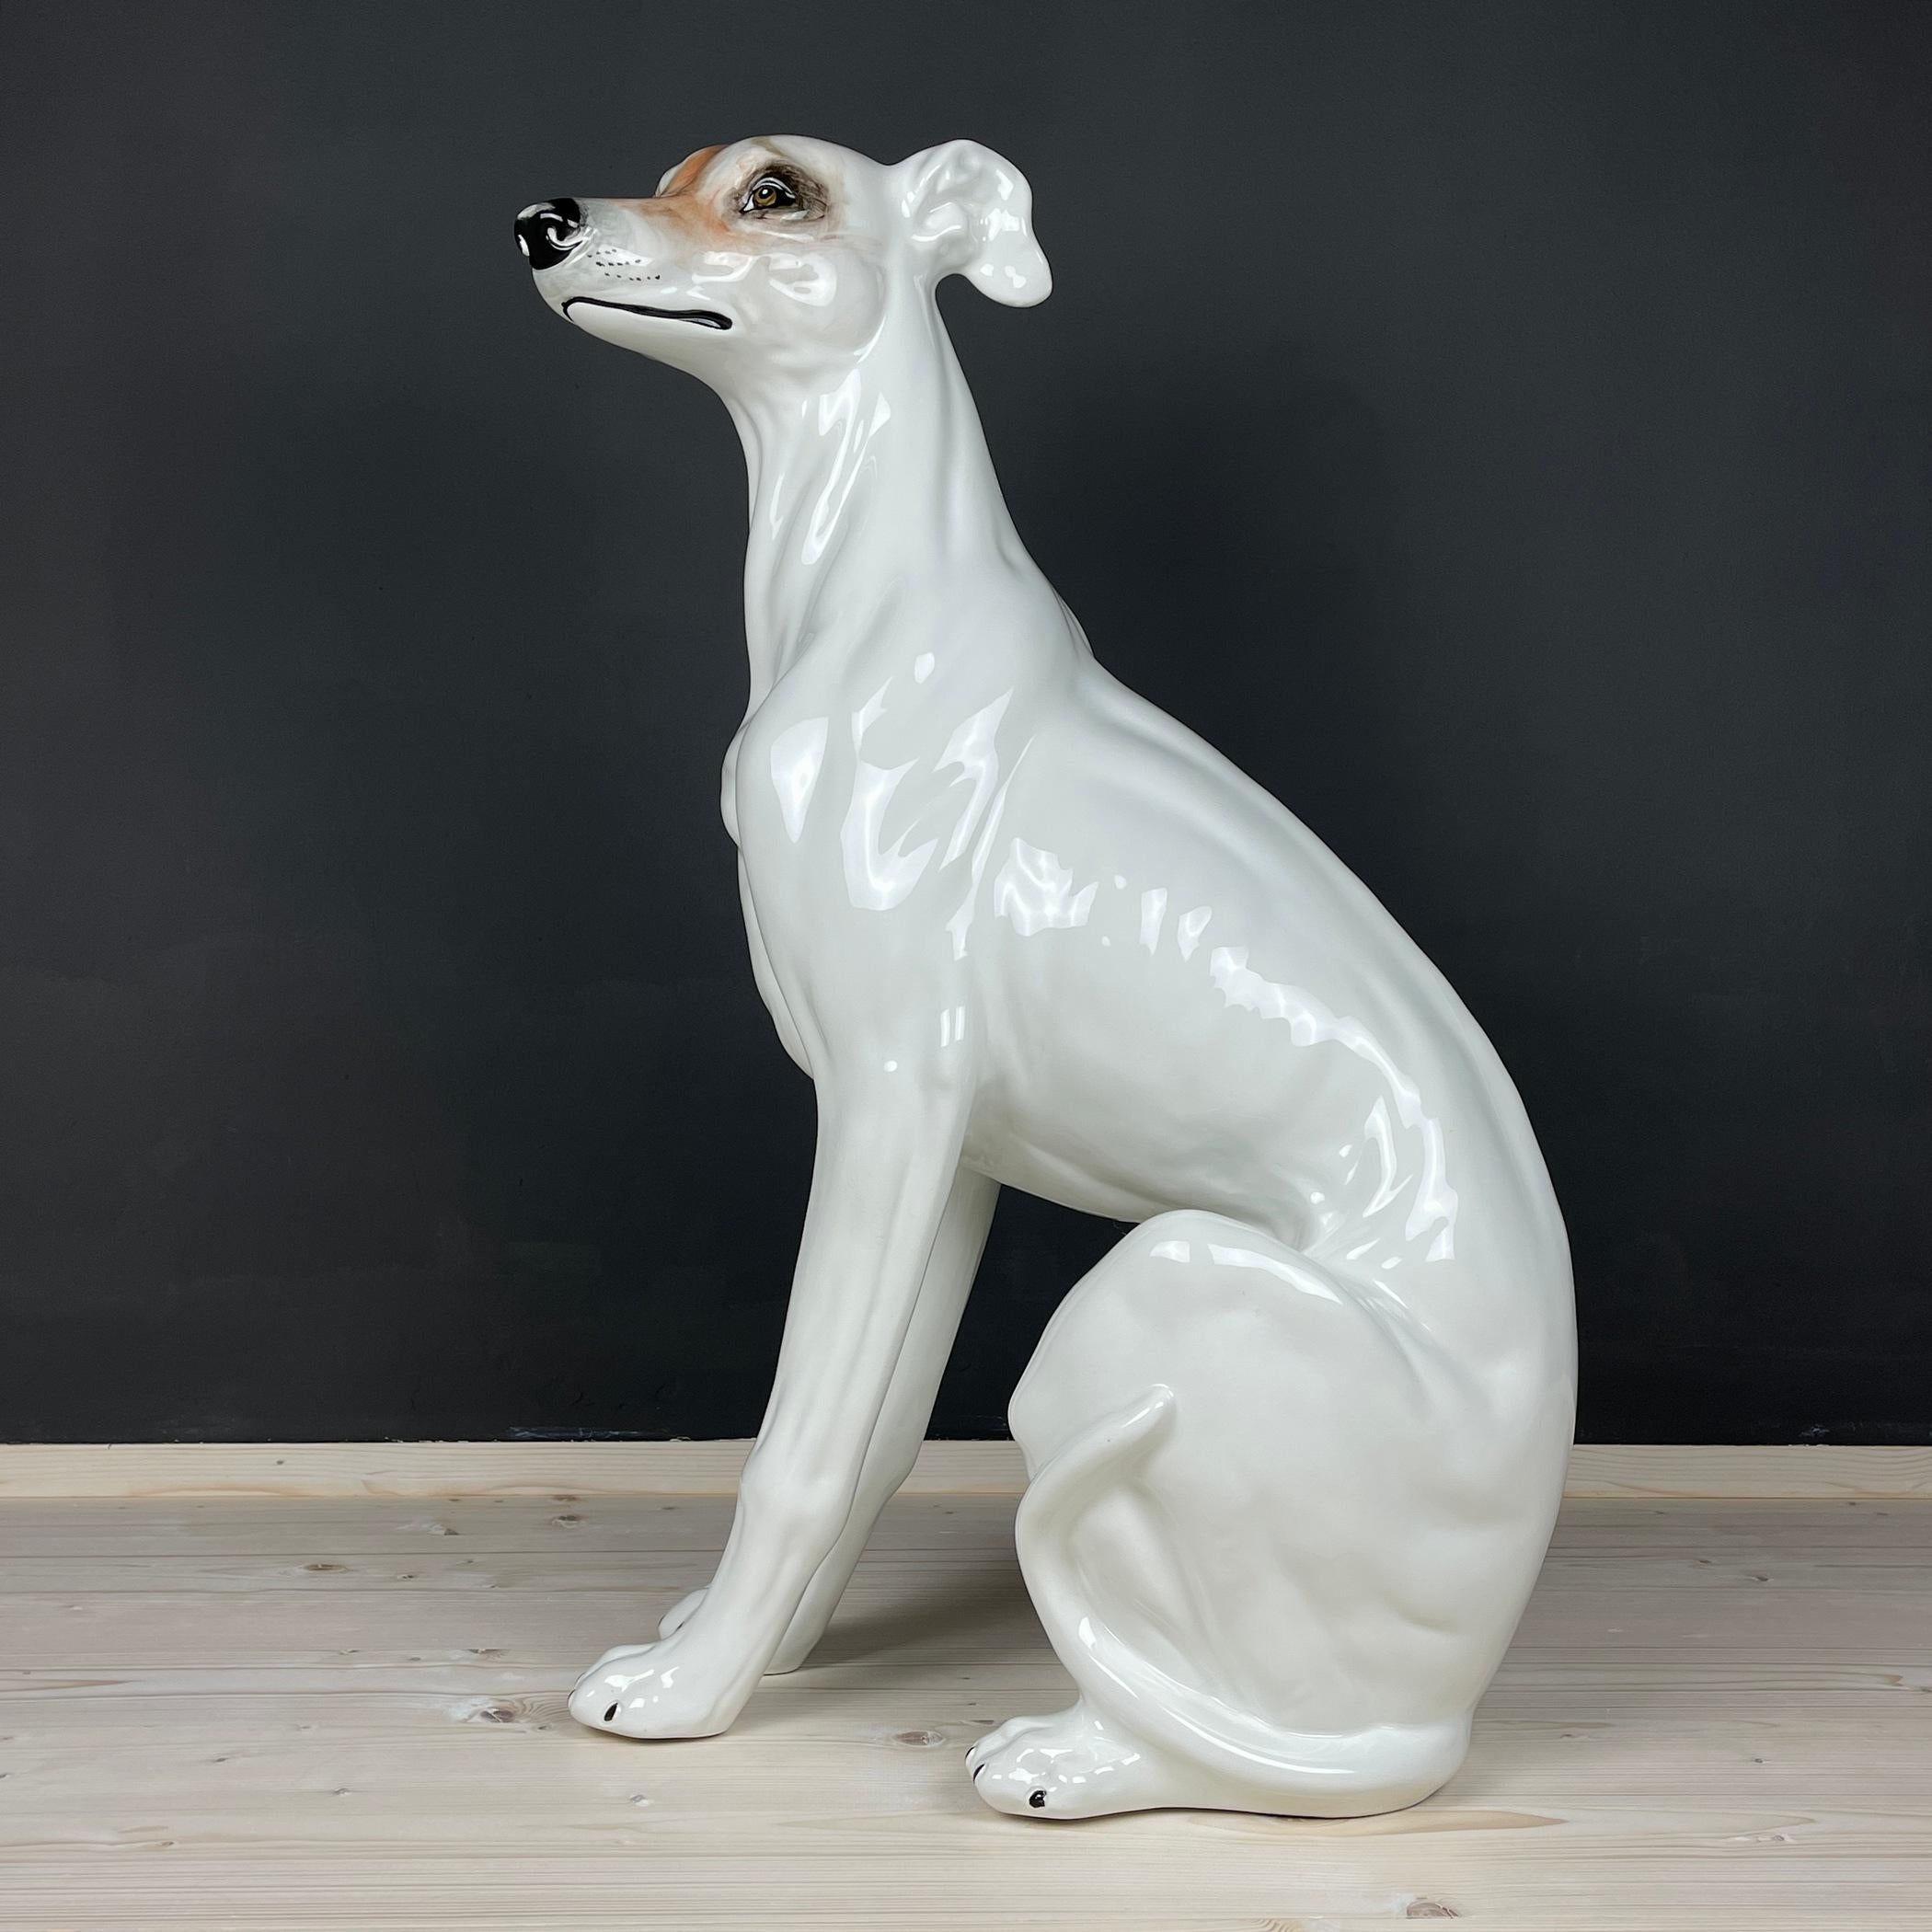 Unveil the allure of Italian craftsmanship with this stunning large hand-painted ceramic animal sculpture – a dog, a treasure from 1980s Bassano, Italy. Immerse yourself in the rarity of this piece, a hand-painted ceramic sculpture that stands as a